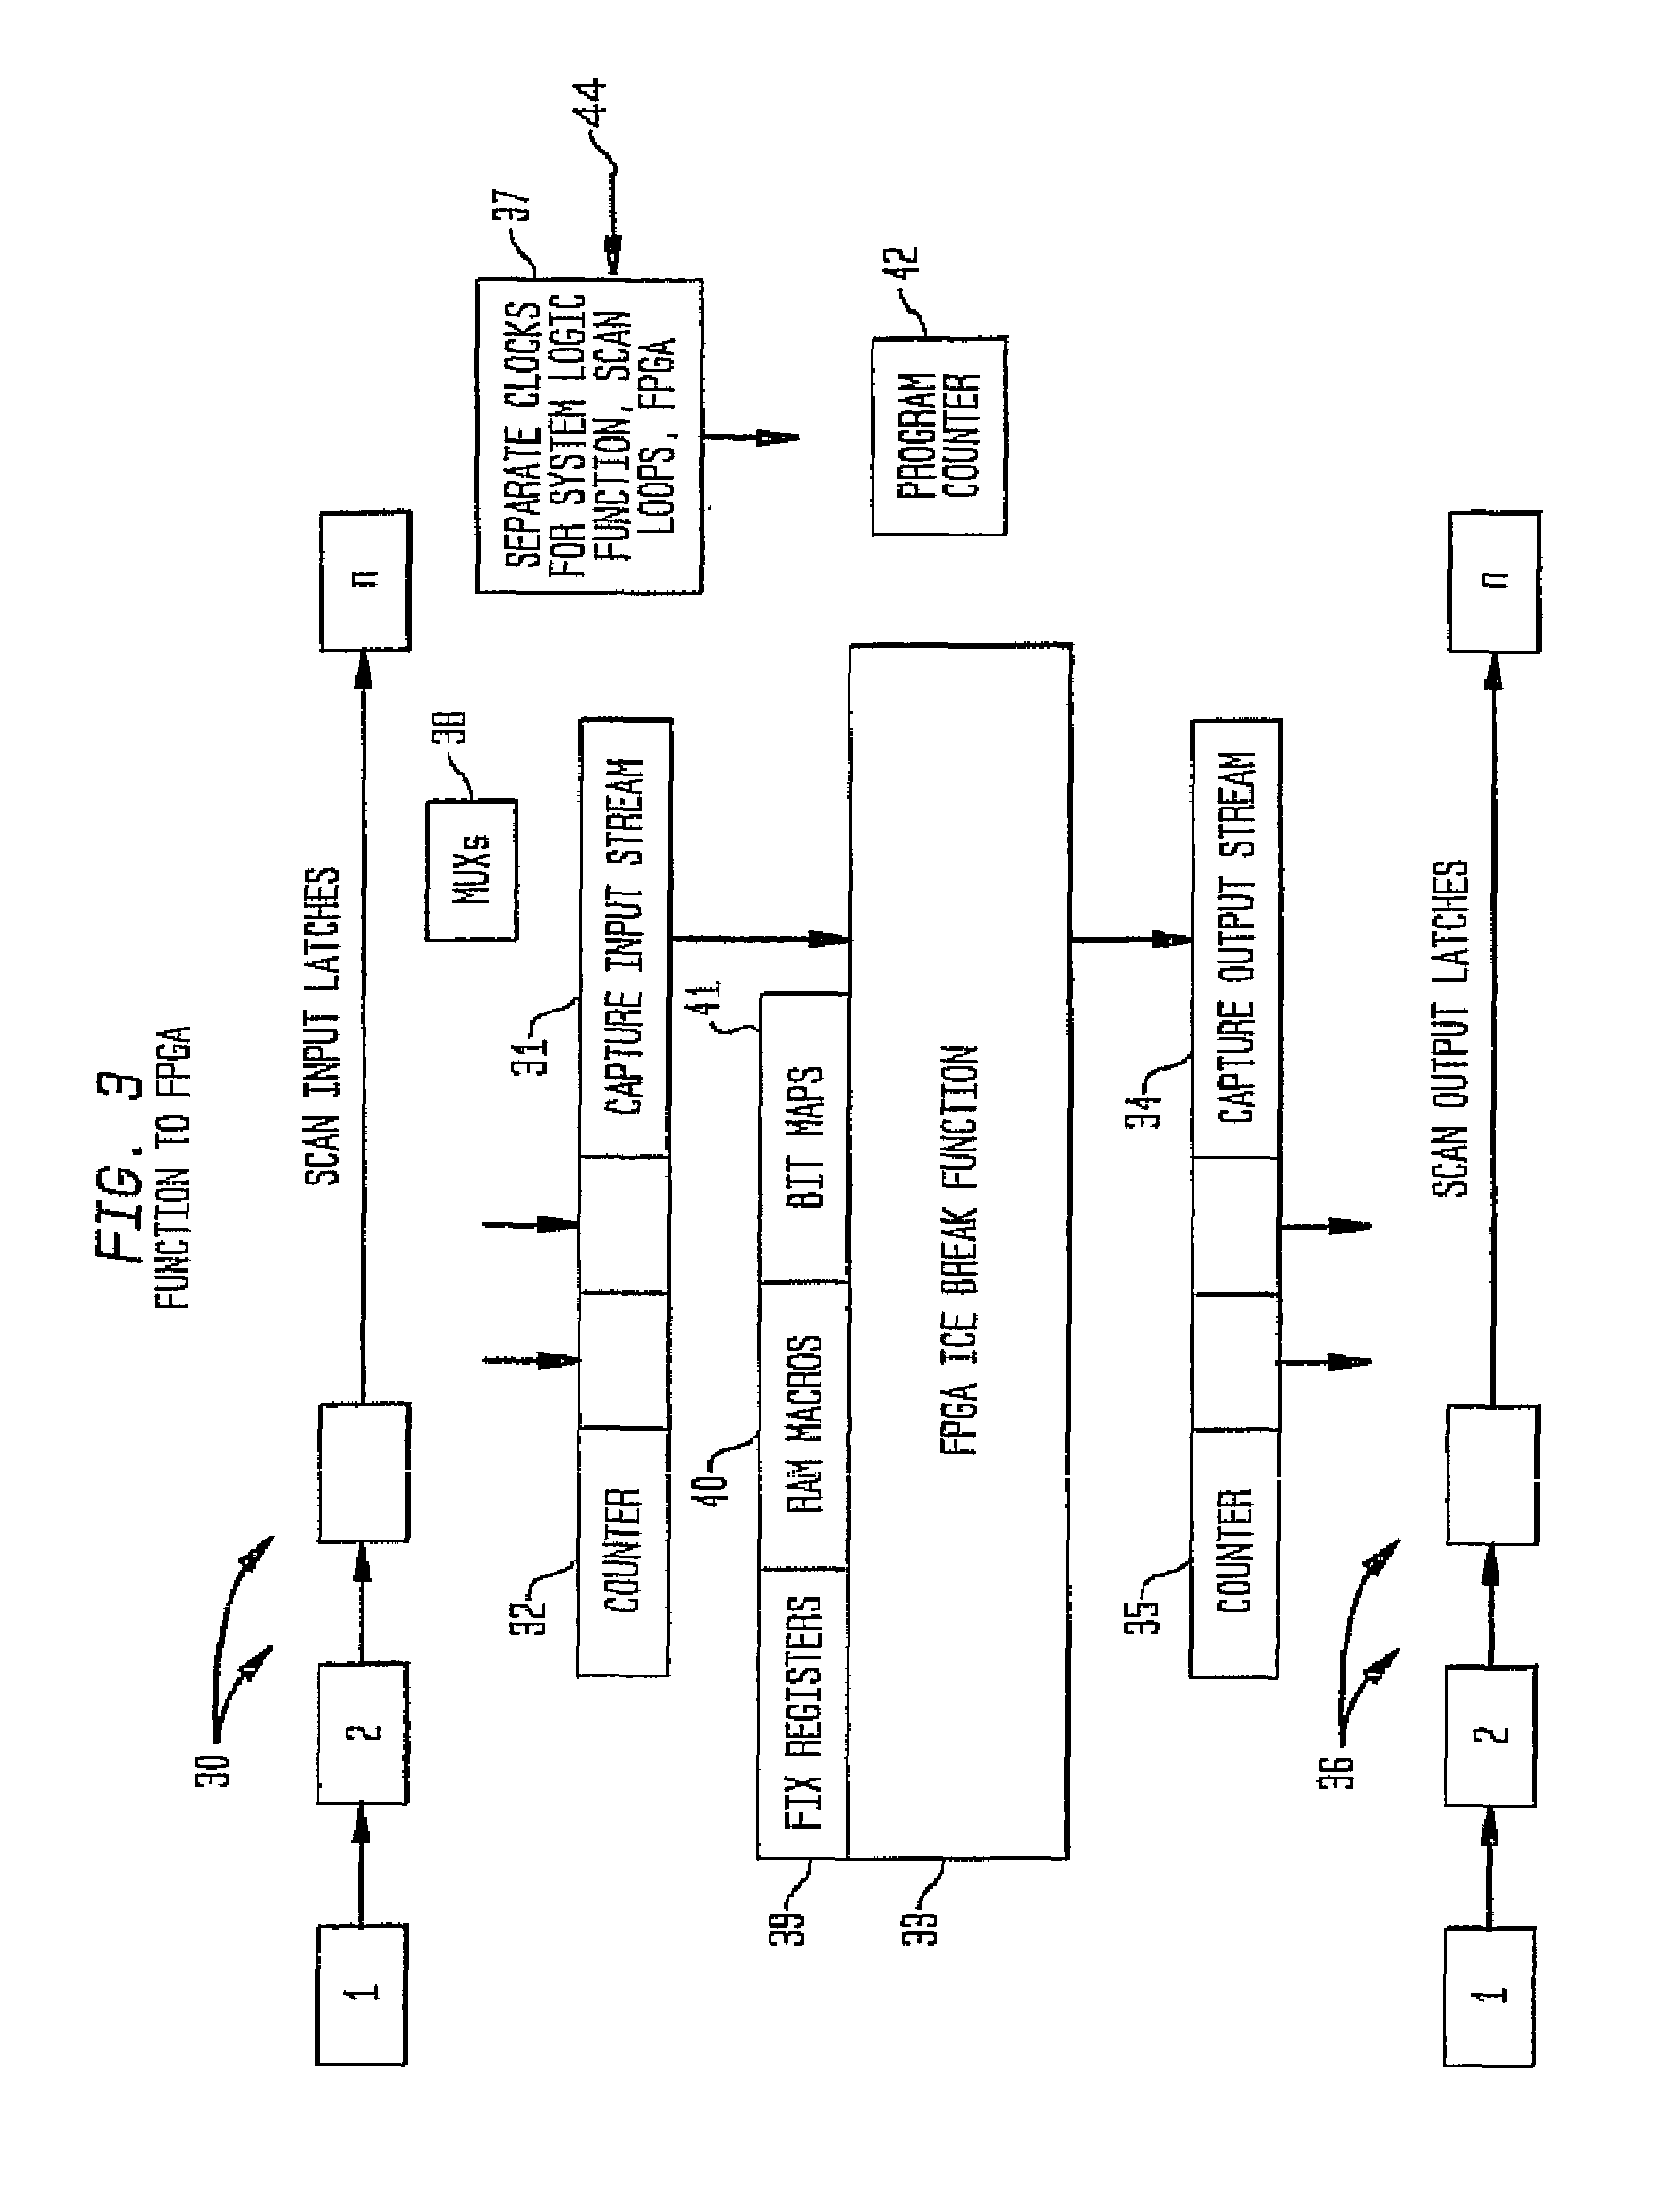 System and method of providing error detection and correction capability in an integrated circuit using redundant logic cells of an embedded FPGA